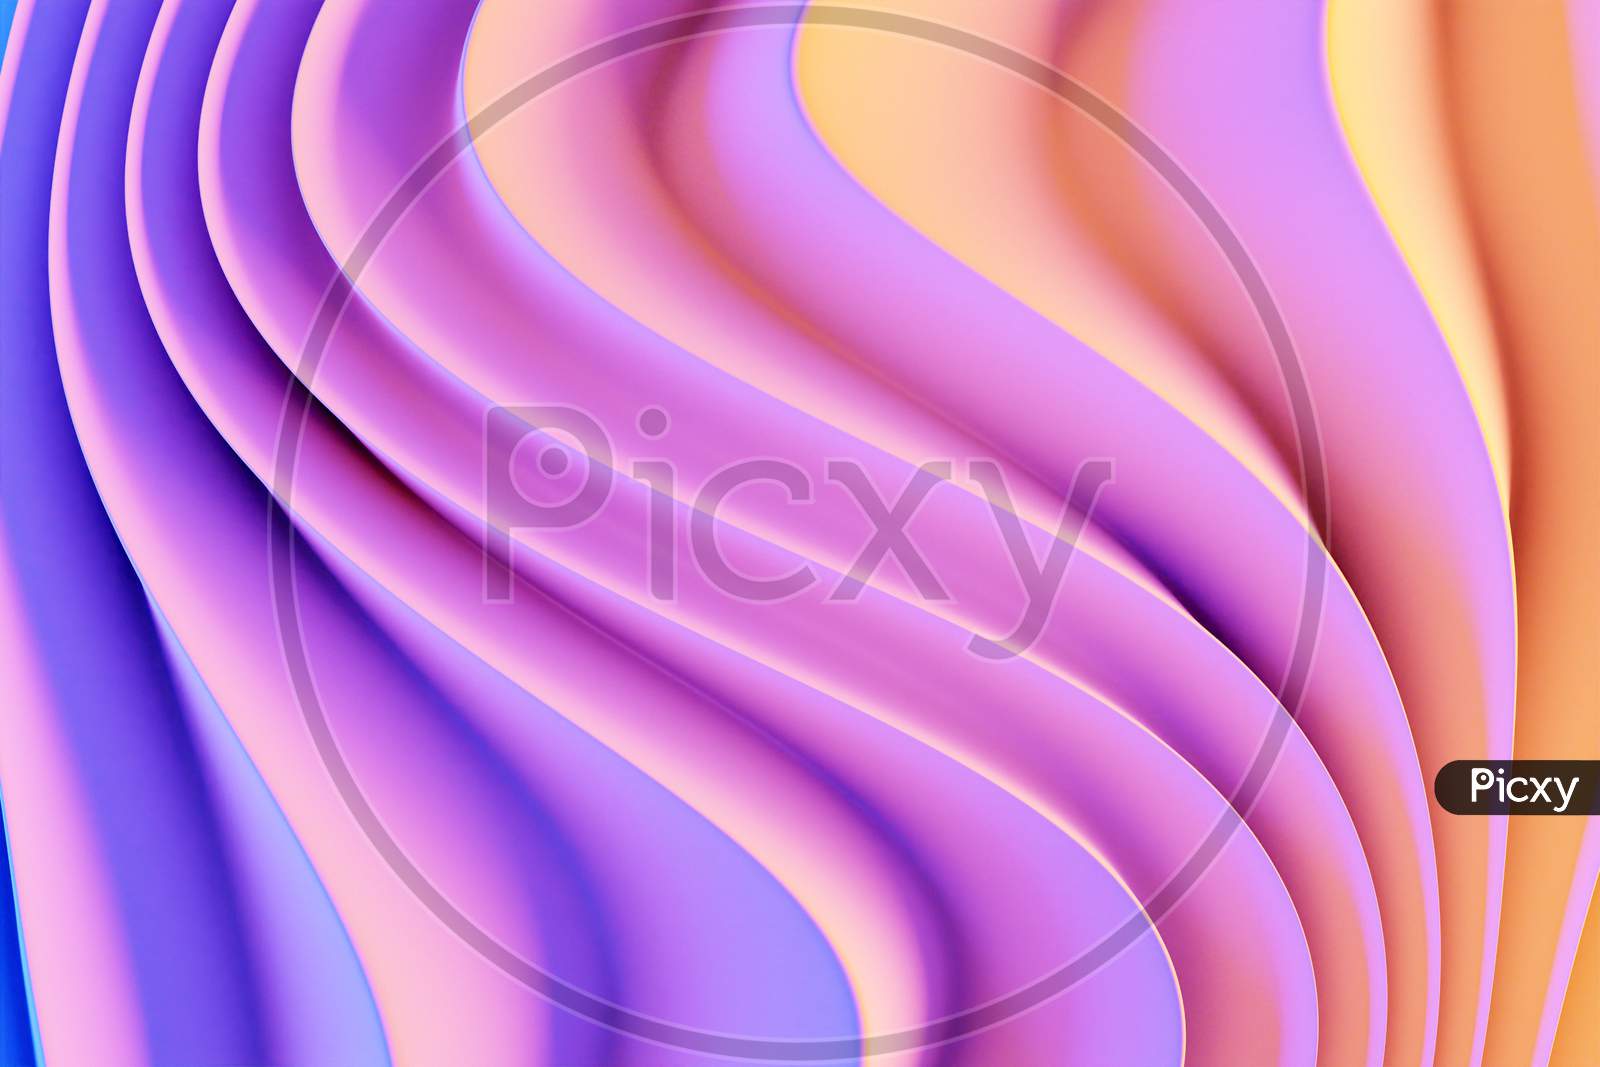 3D Illustration Of A Stereo Strip Of Different Colors. Geometric Stripes Similar To Waves. Abstract   Pink And Orange   Glowing Crossing Lines Pattern